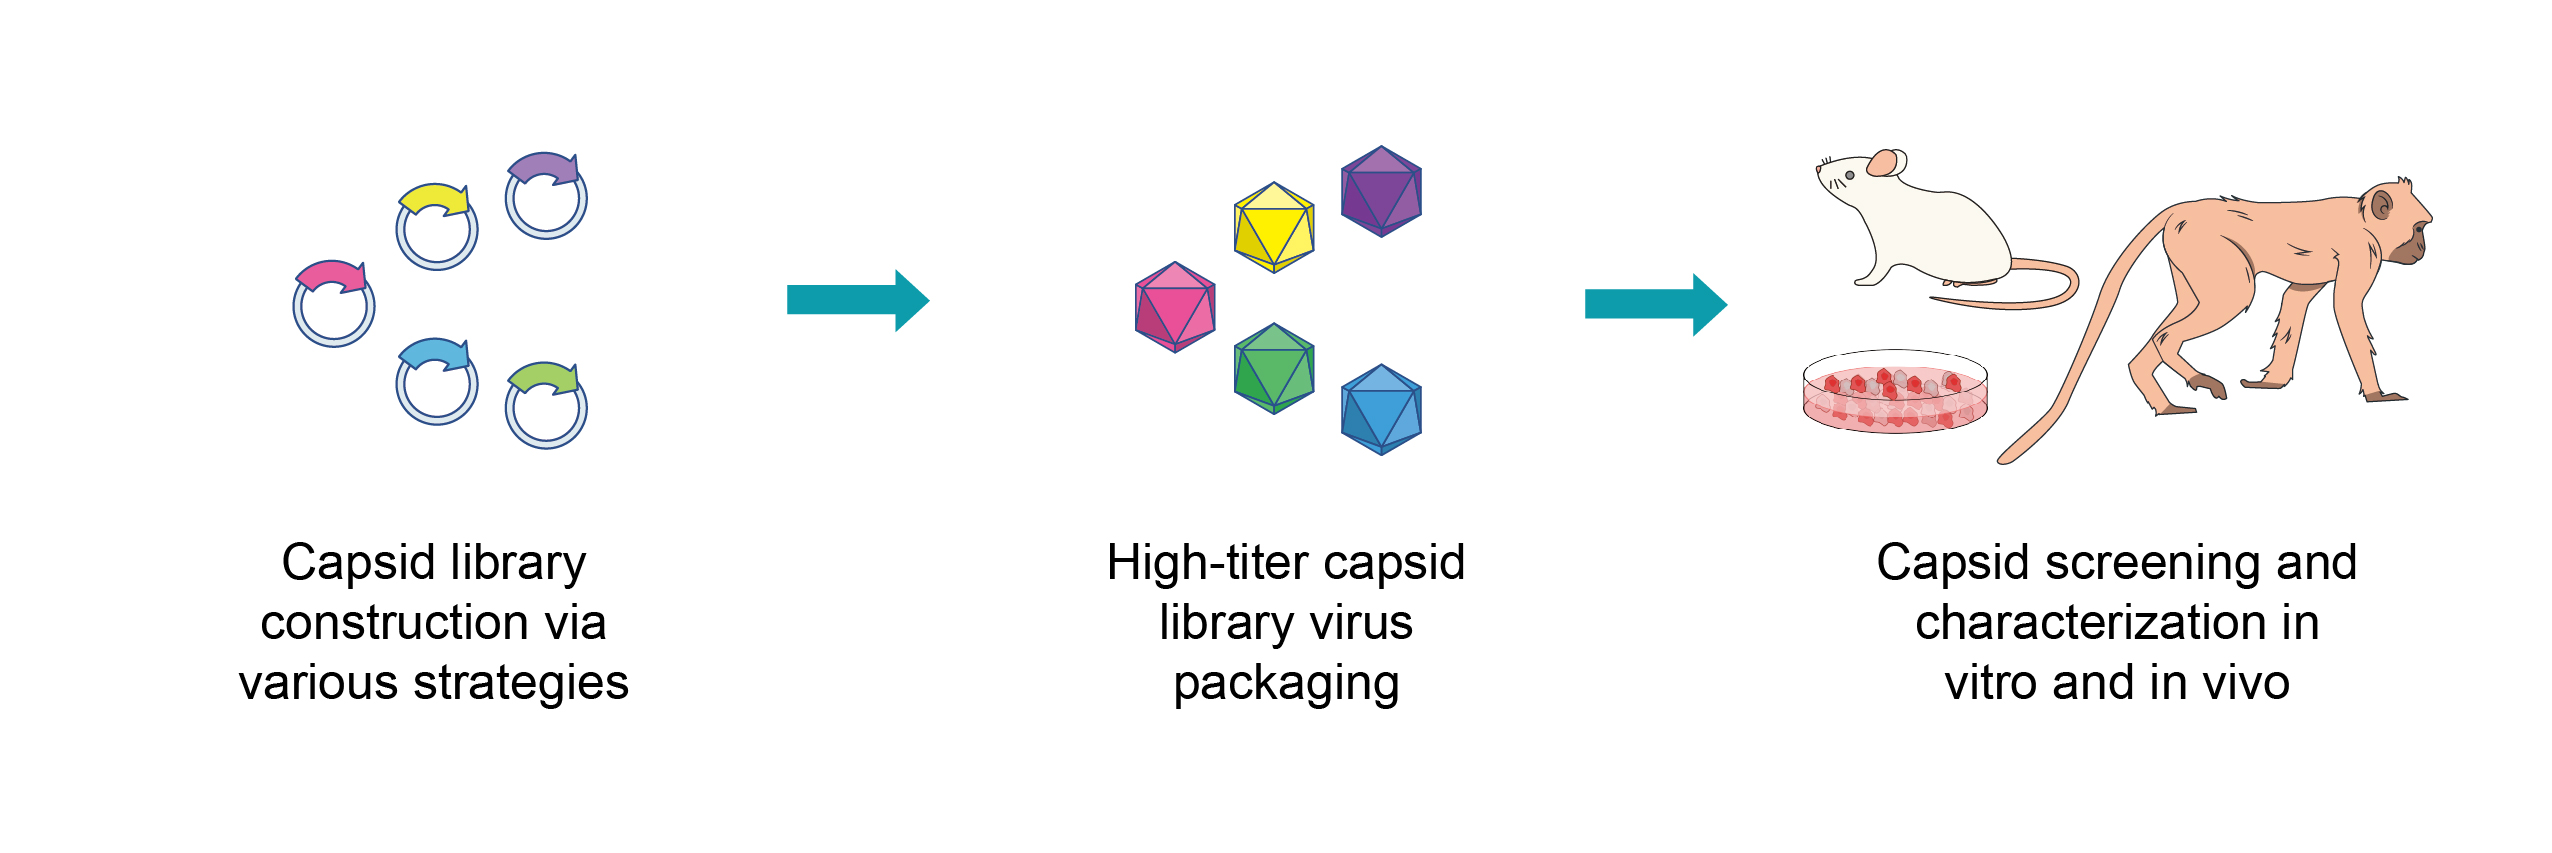 Capsid library construction > High-titer capsid virus packaging > Capsid screening and characterization in vitro and in vivo.